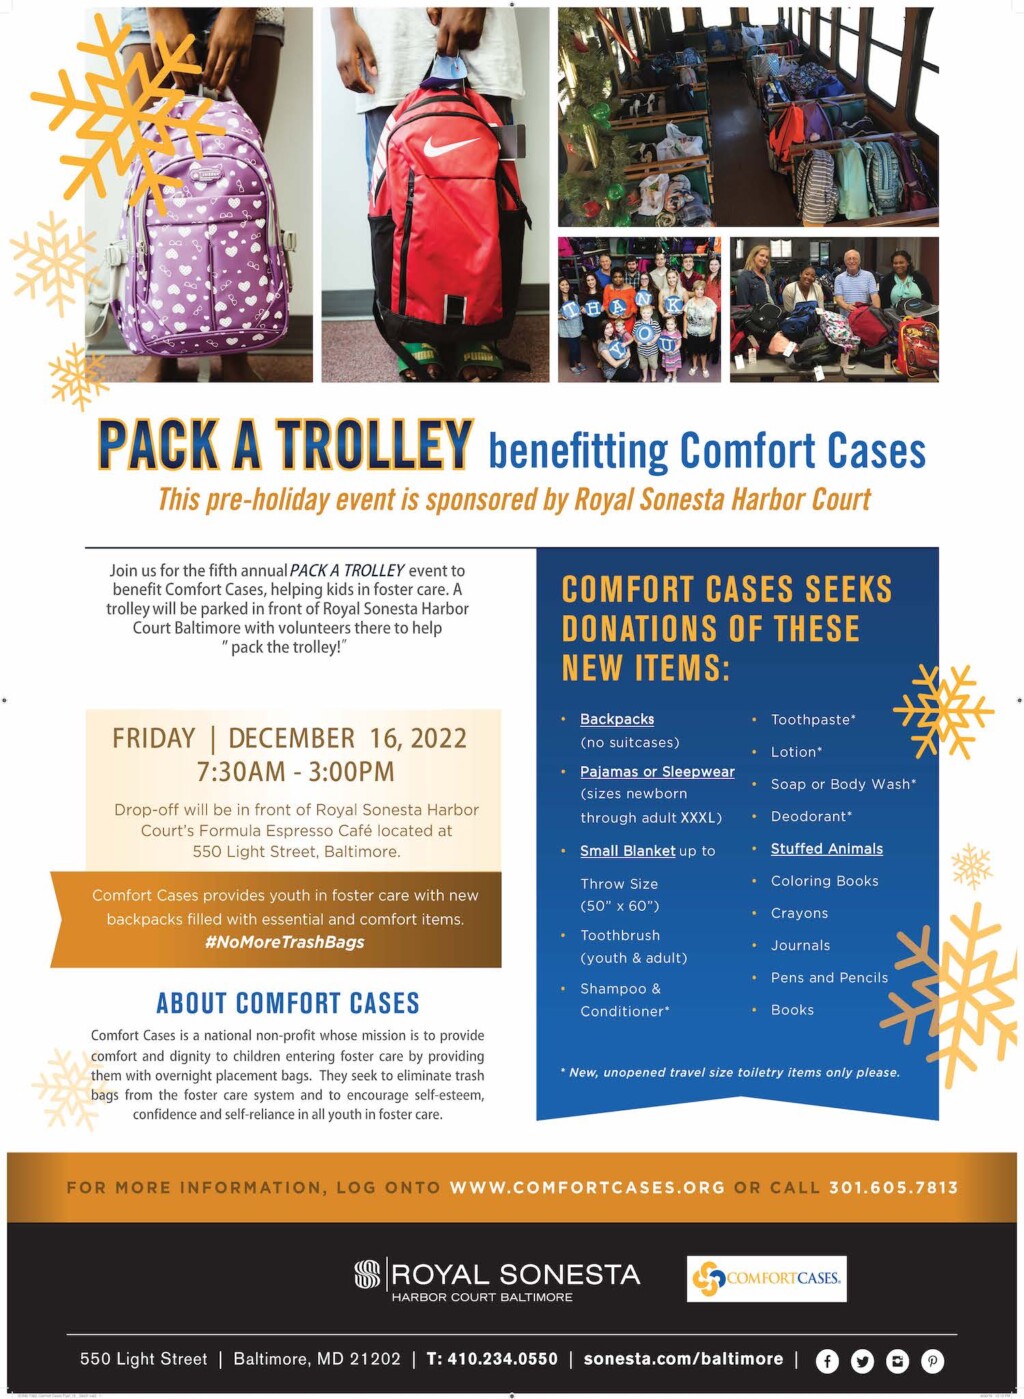 Fifth Annual Pack-a-Trolley